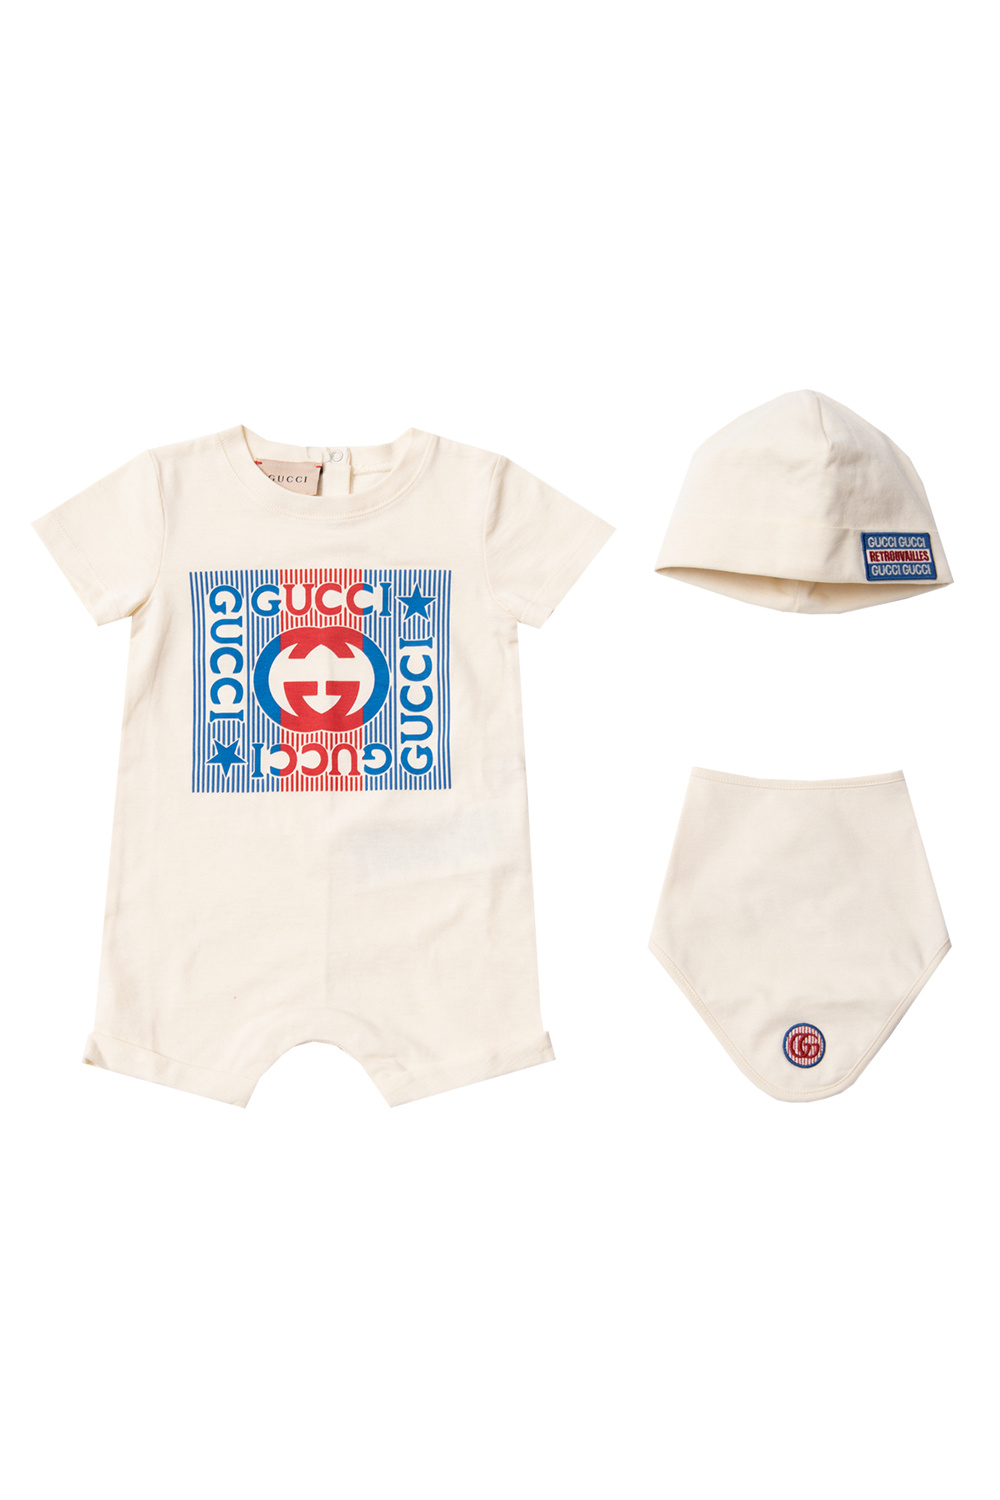 Gucci Kids cups footwear polo-shirts caps lighters storage